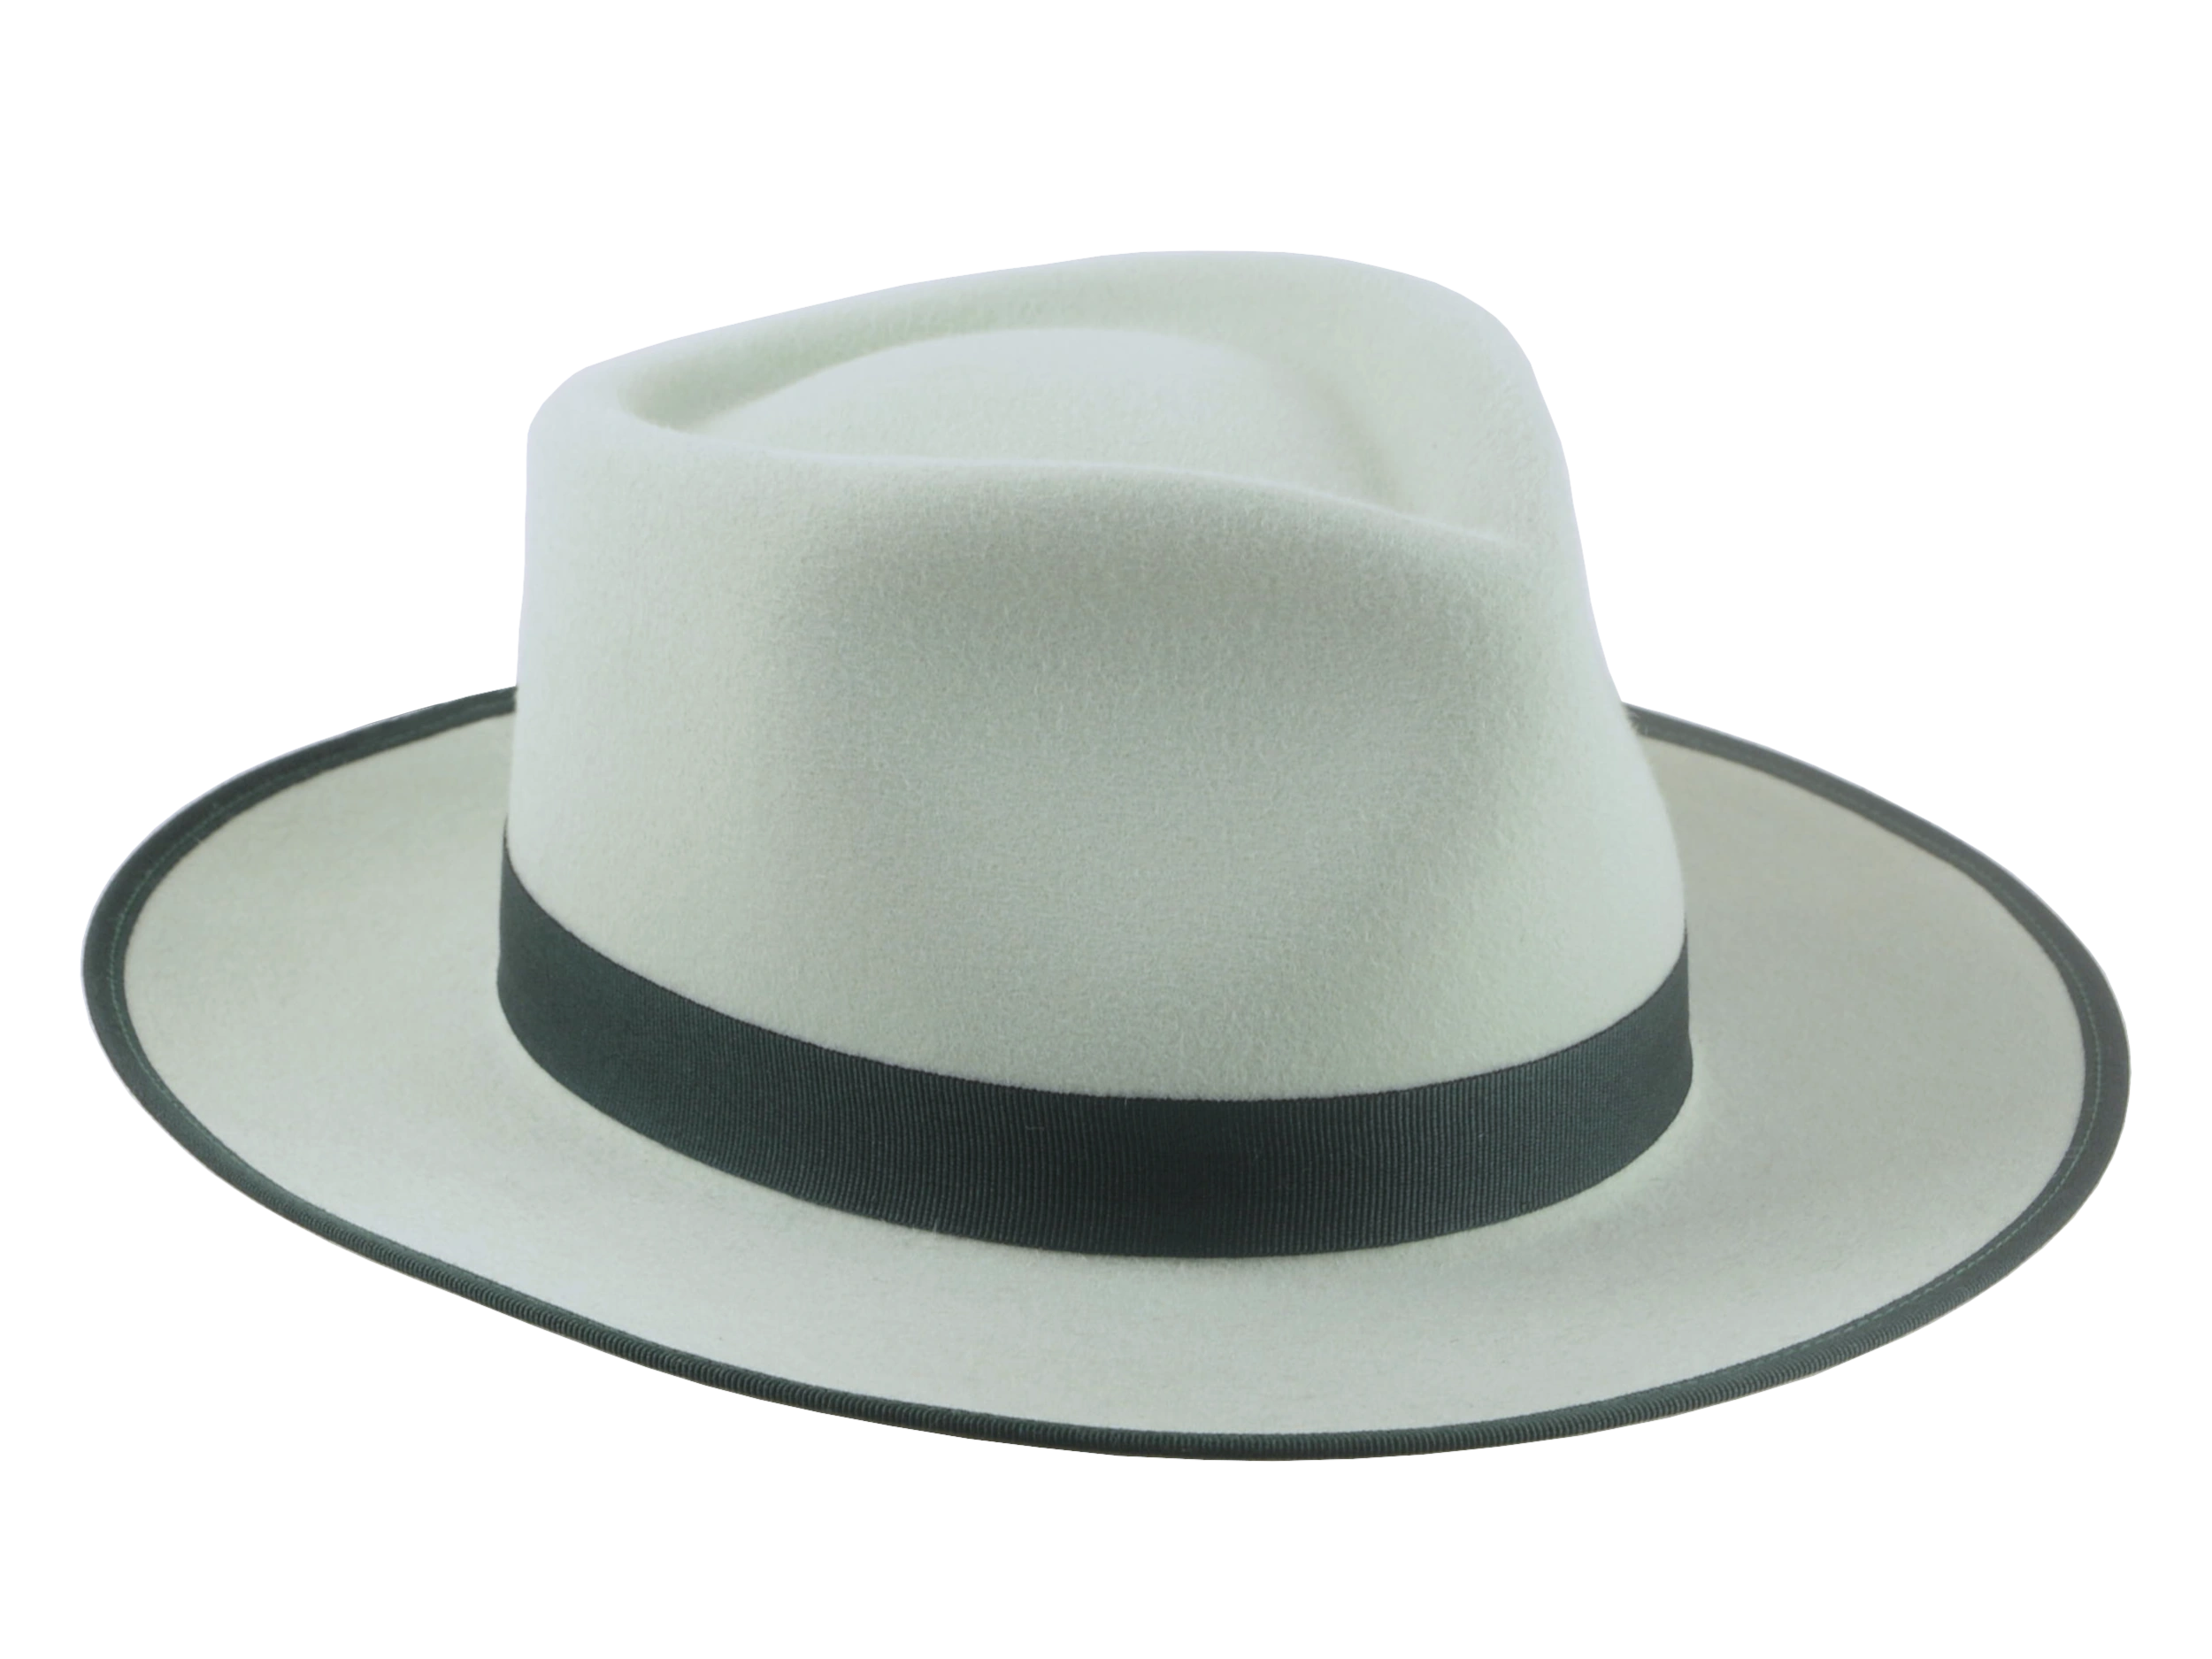 "Detail shot of the wide brim and ribbon-bound edge of the fedora